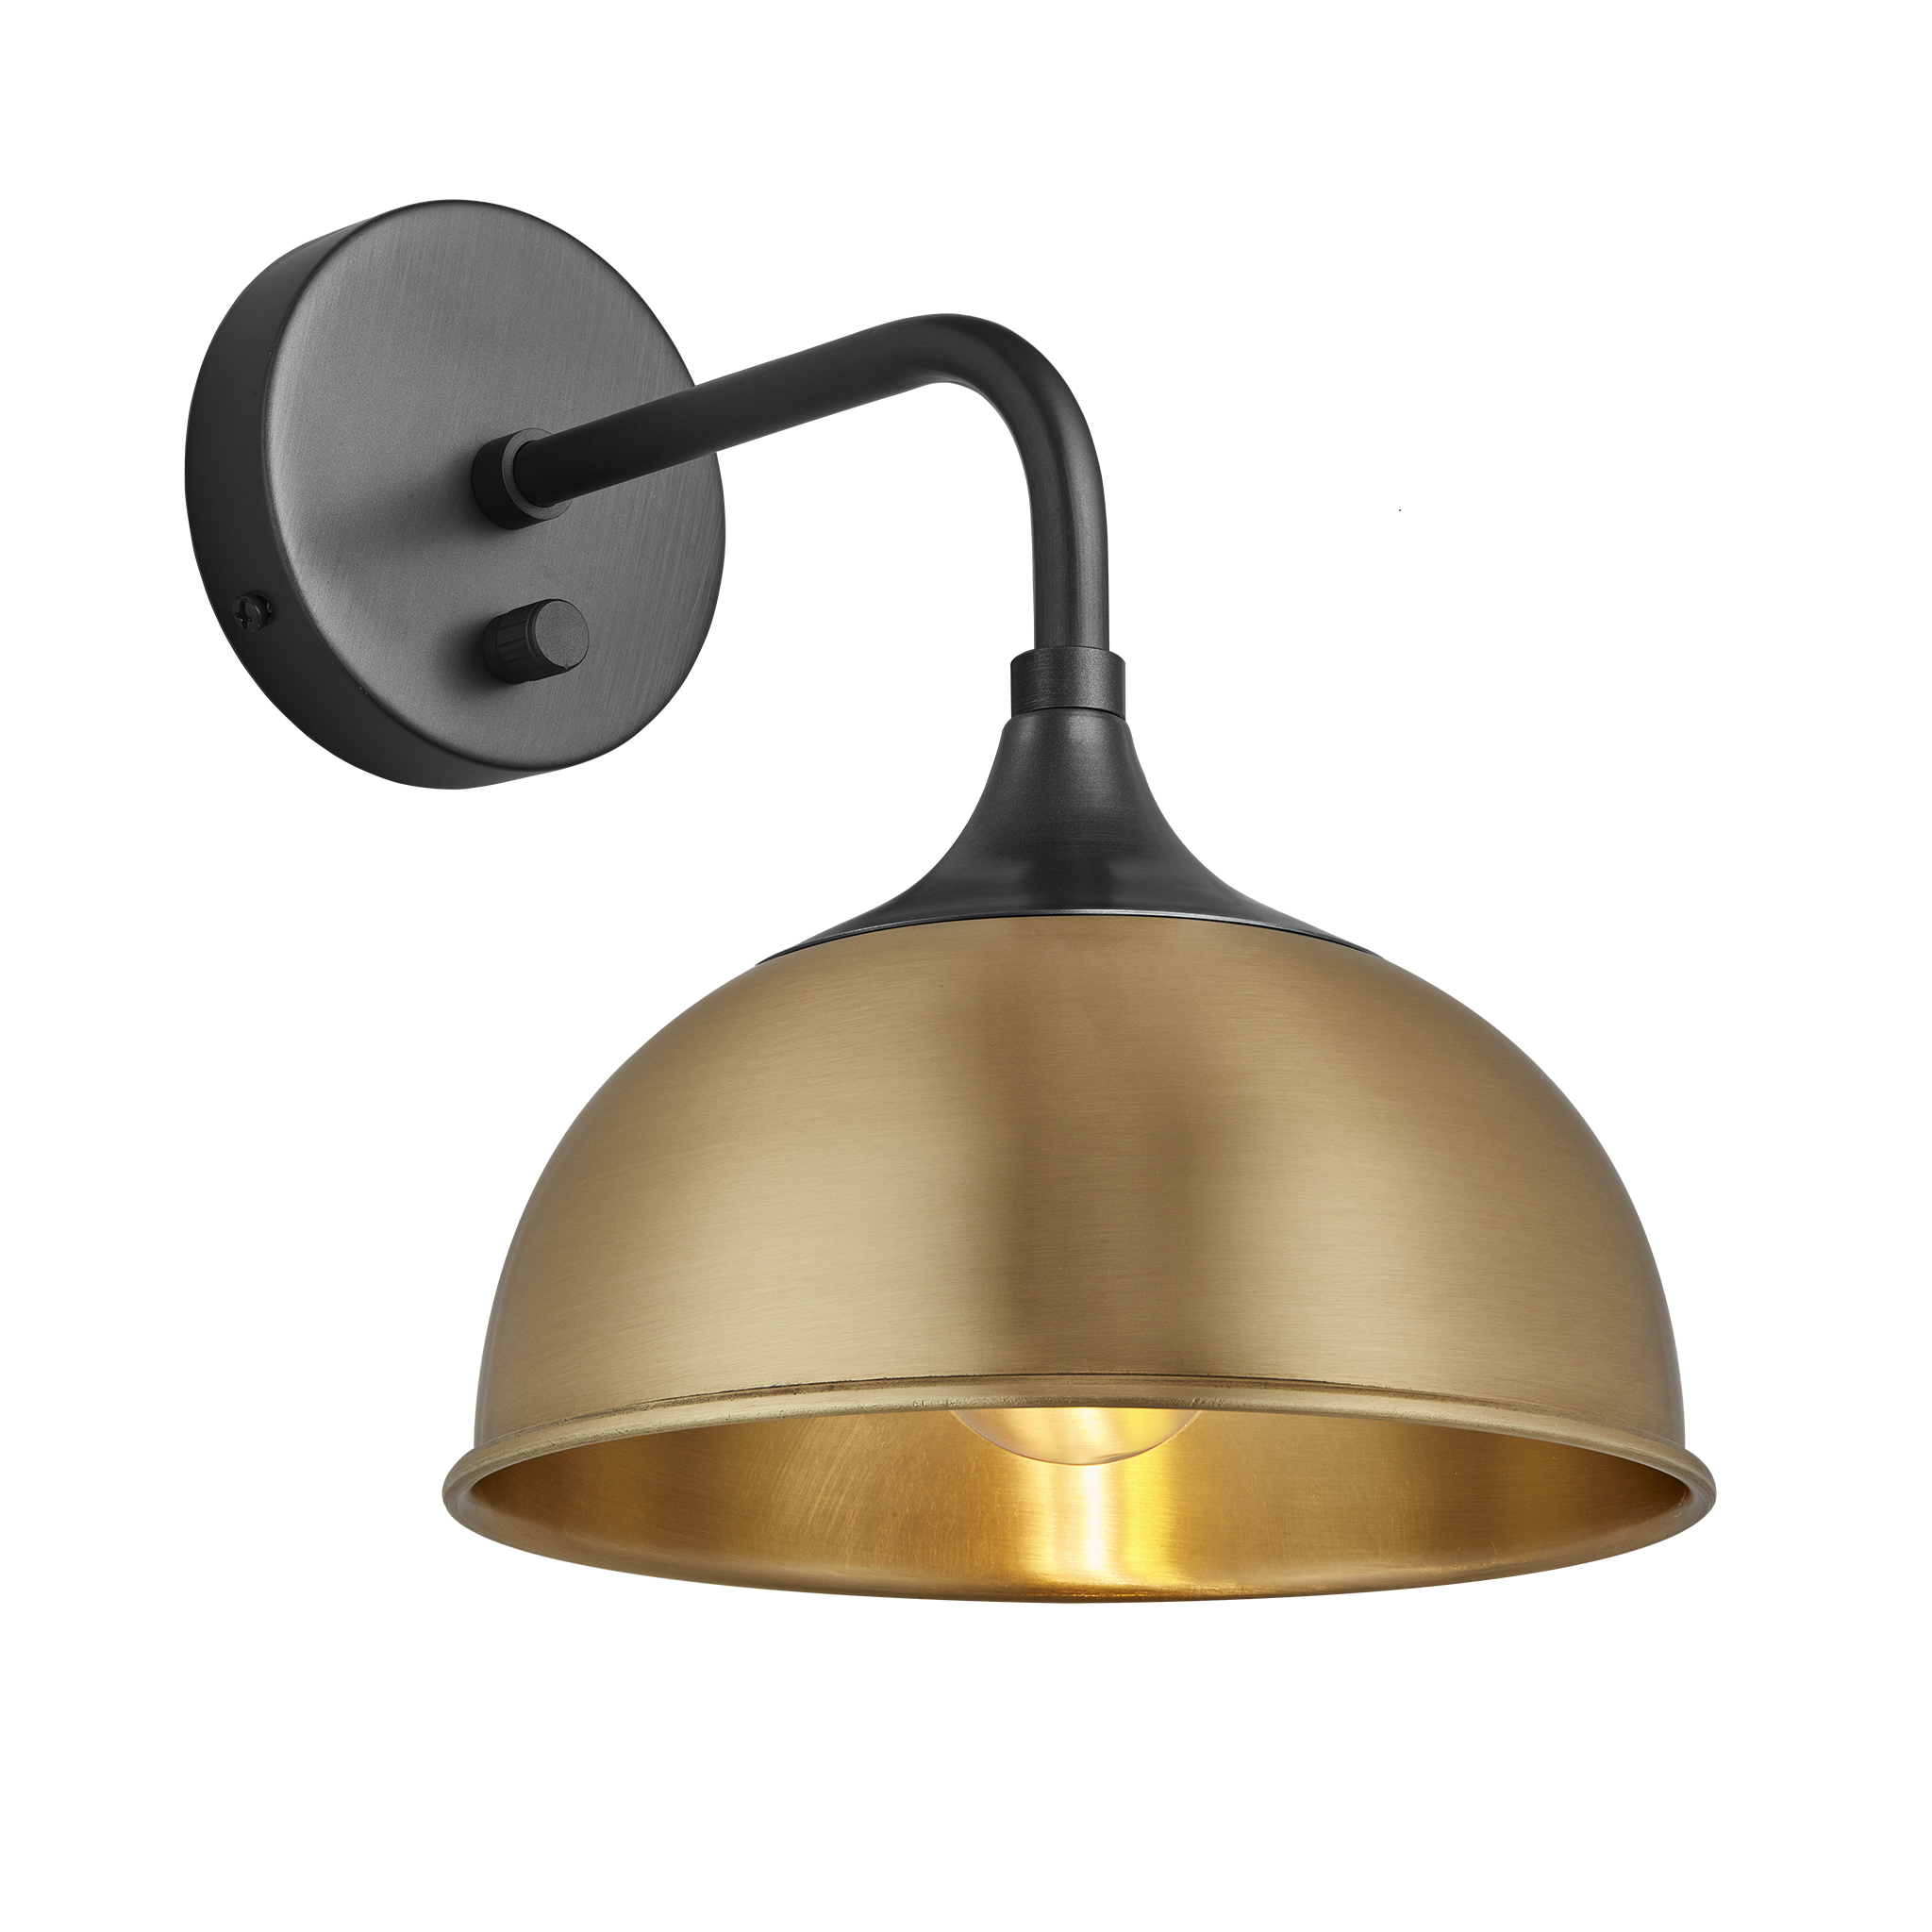  Chelsea Dome Wall Light - 8 Inch - Brass - Pewter Holder